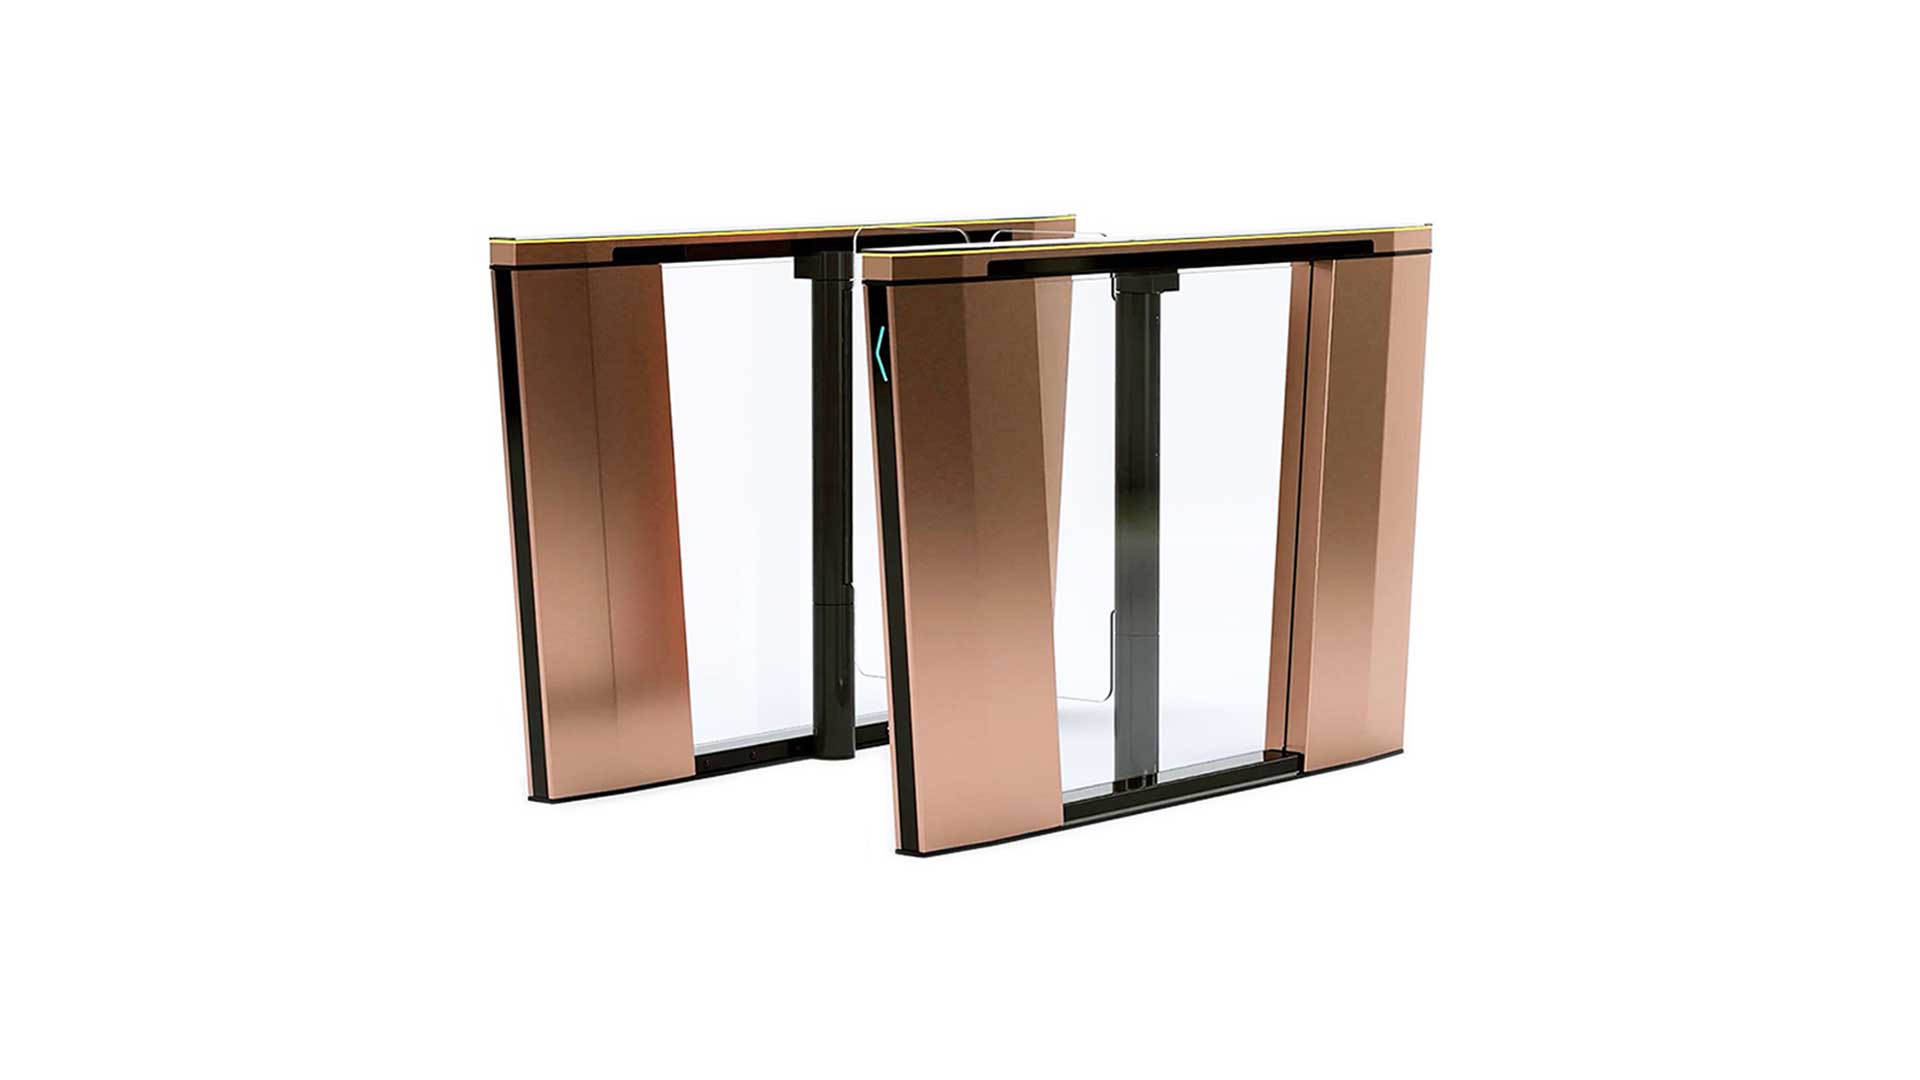 Cominfo easy gate superb speed turnstiles for elegant interior and access control